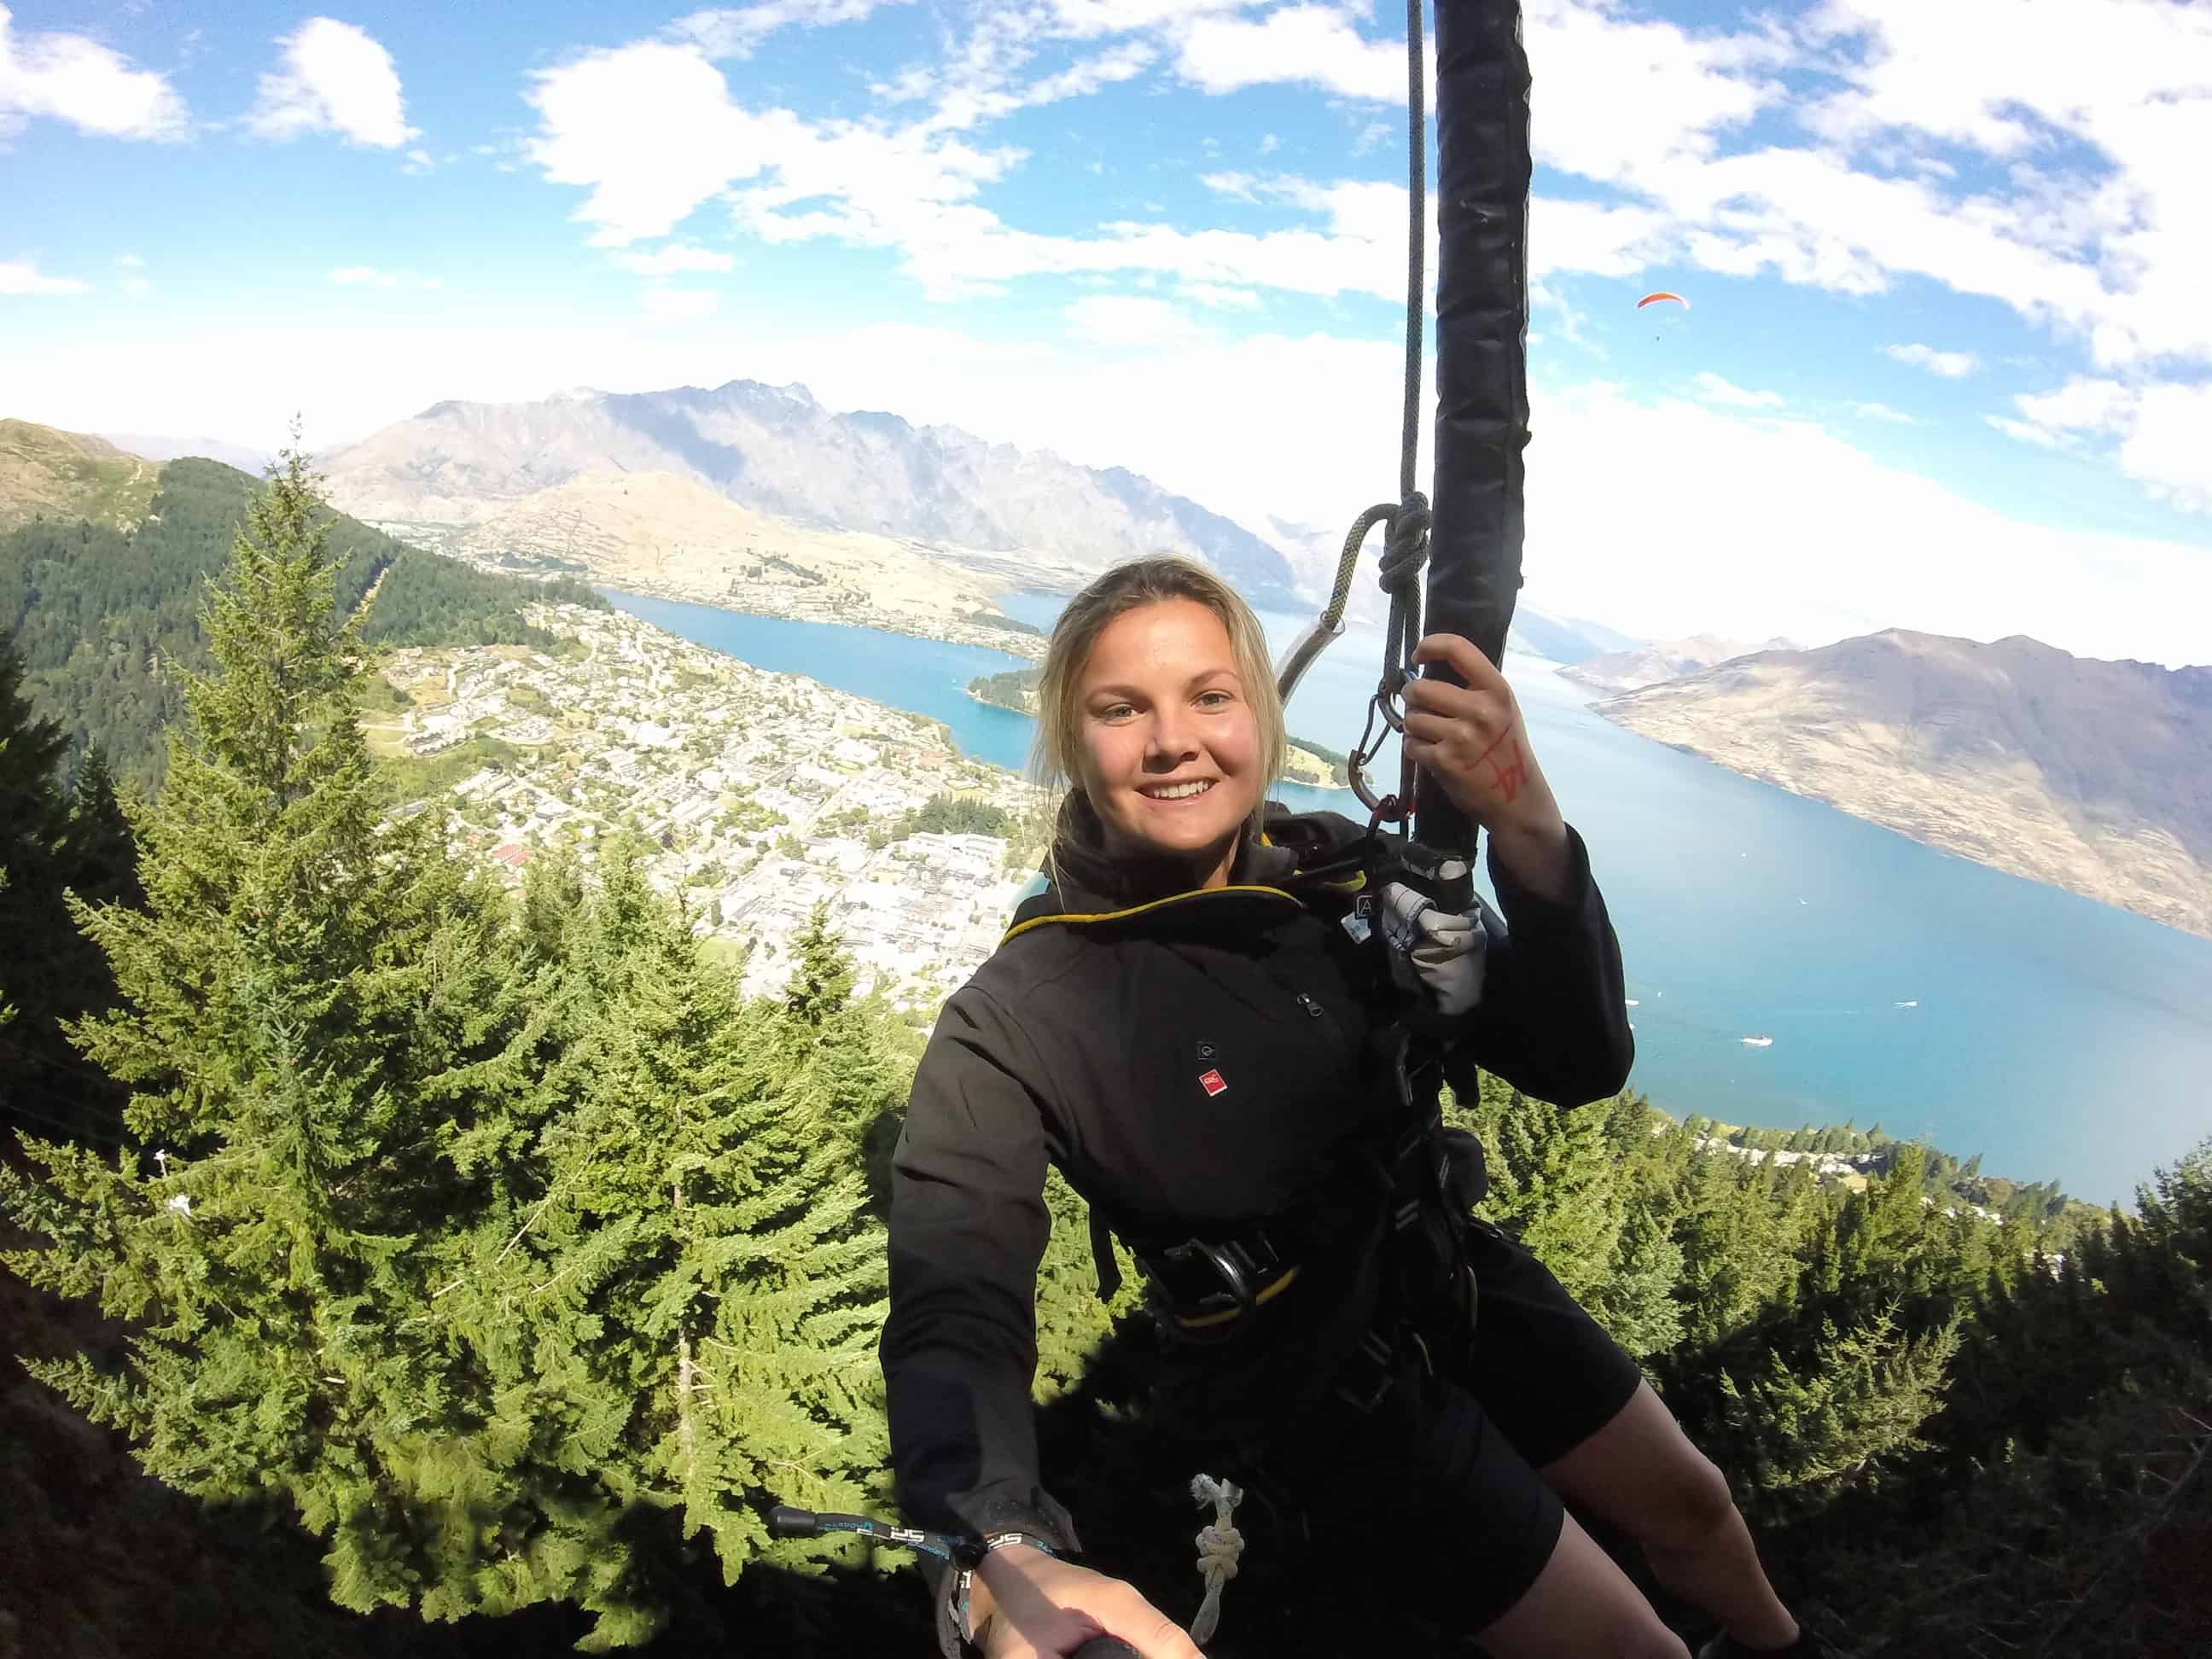 Views back to Queenstown on the bungy jump